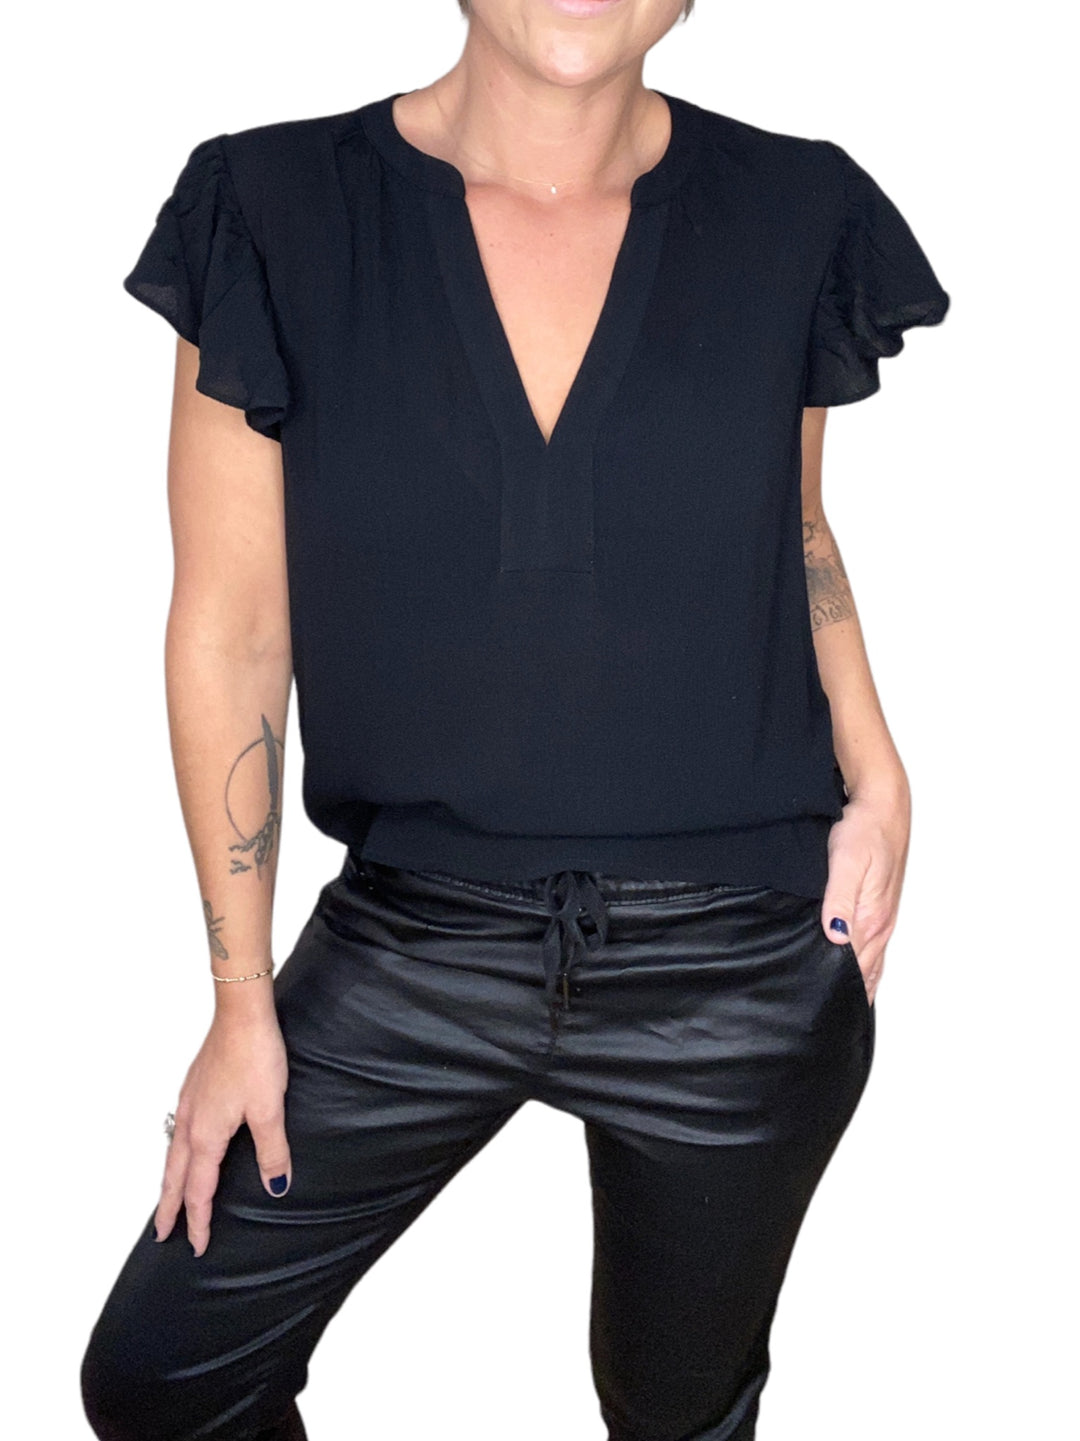 QUAY V-NECK RUFFLE SLEEVE TOP - BLACK - Kingfisher Road - Online Boutique